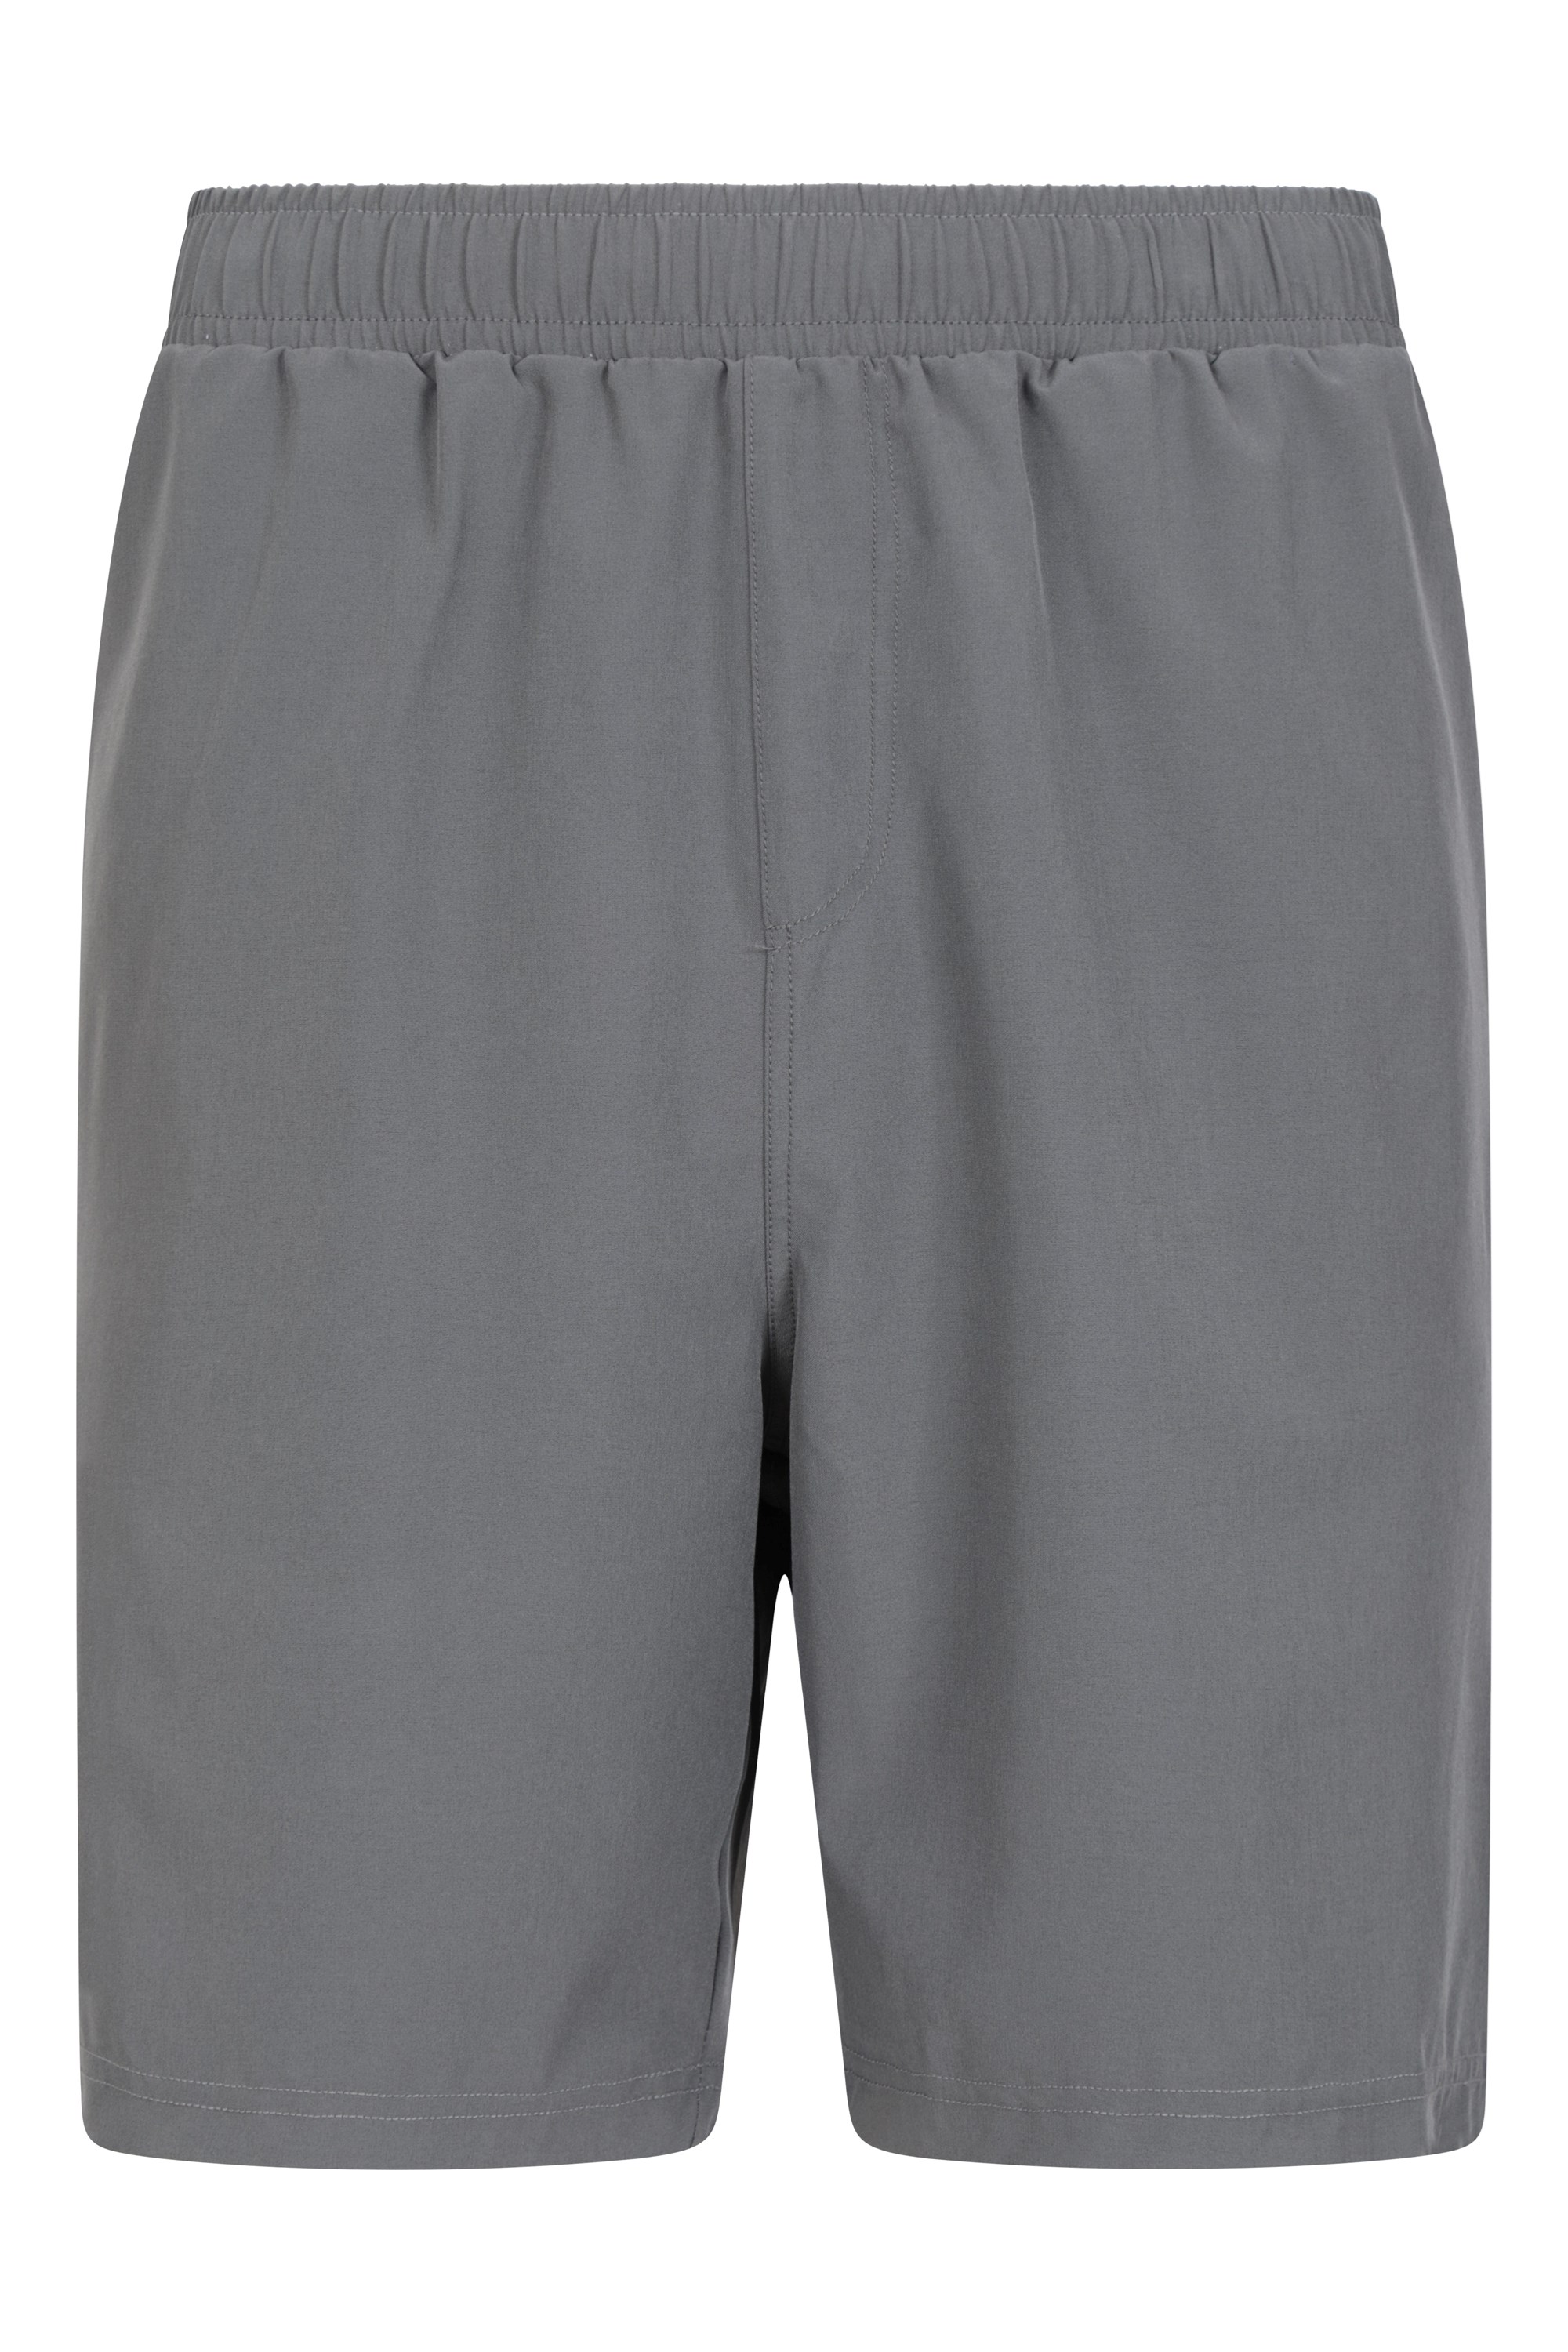 Coos Bay Athletic Running Fitness Exercise Shorts 7 Inseam Shorts